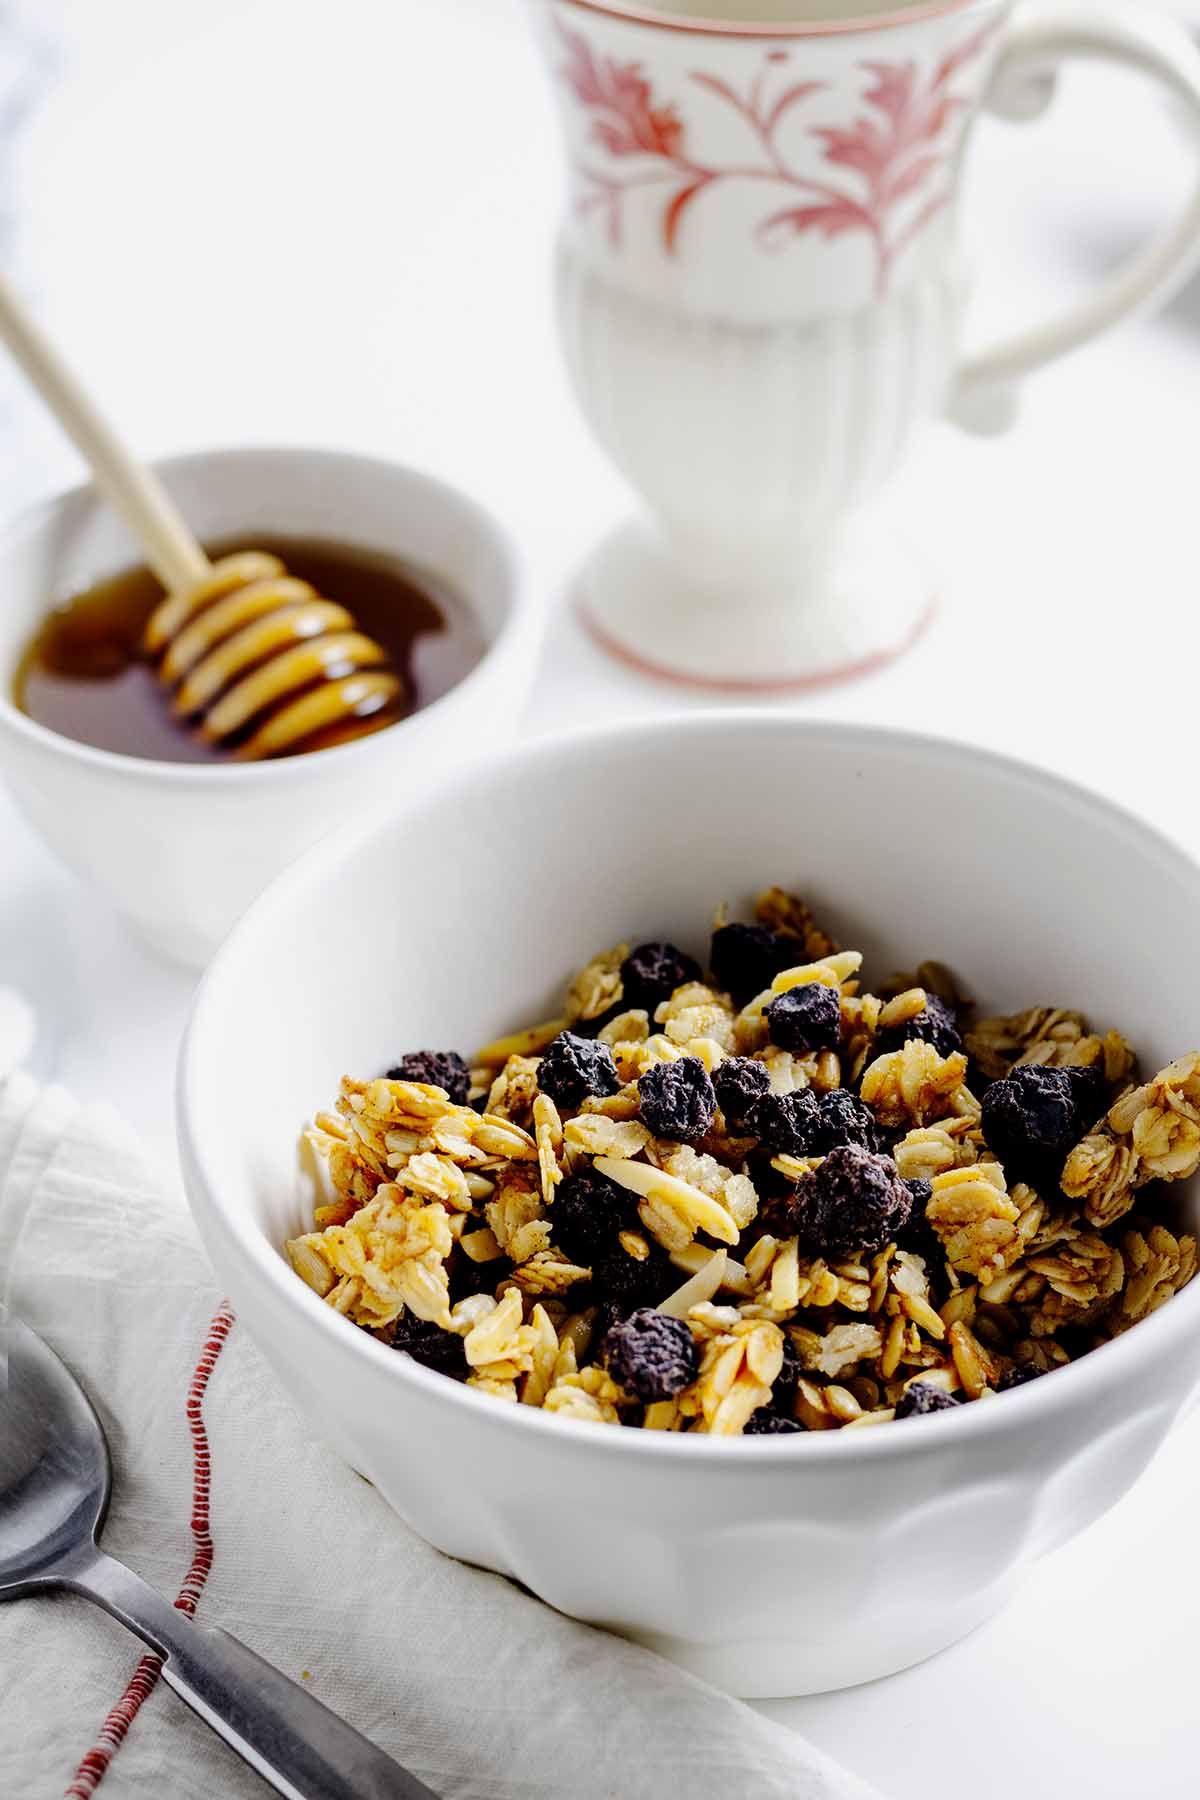 Blueberry granola in a white bowl with a small bowl of honey and wand in the background